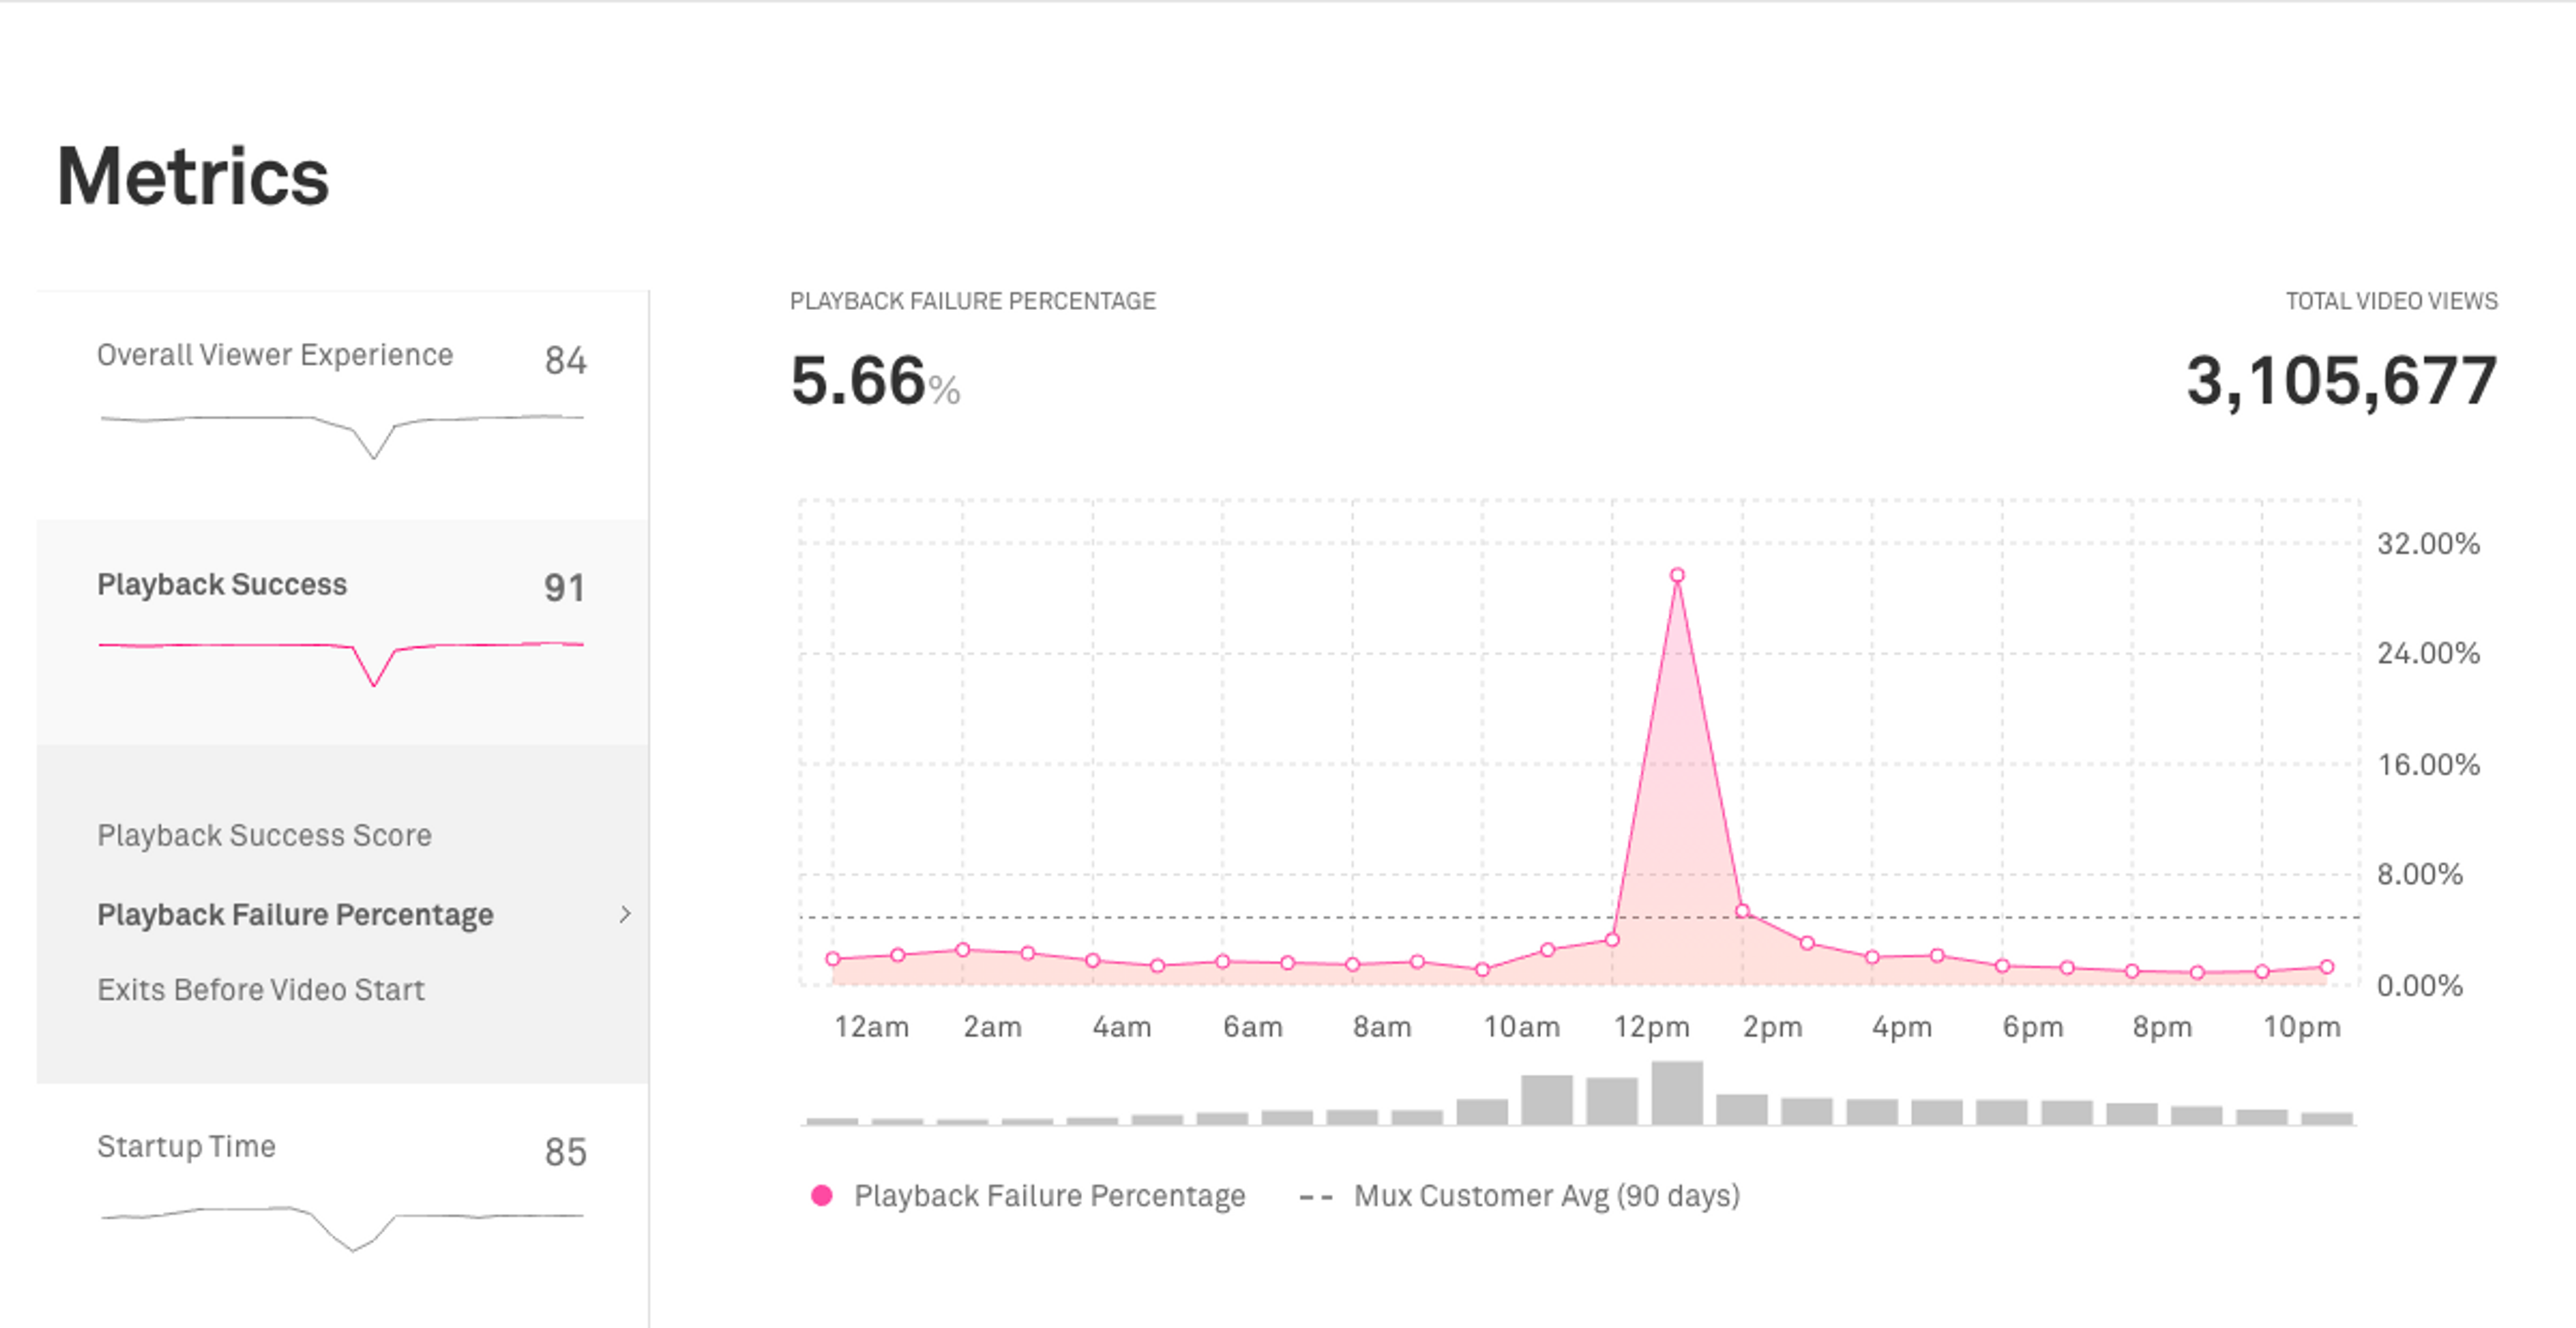 The Data Dashboard Metrics page showing Playback Failure Percentage over time